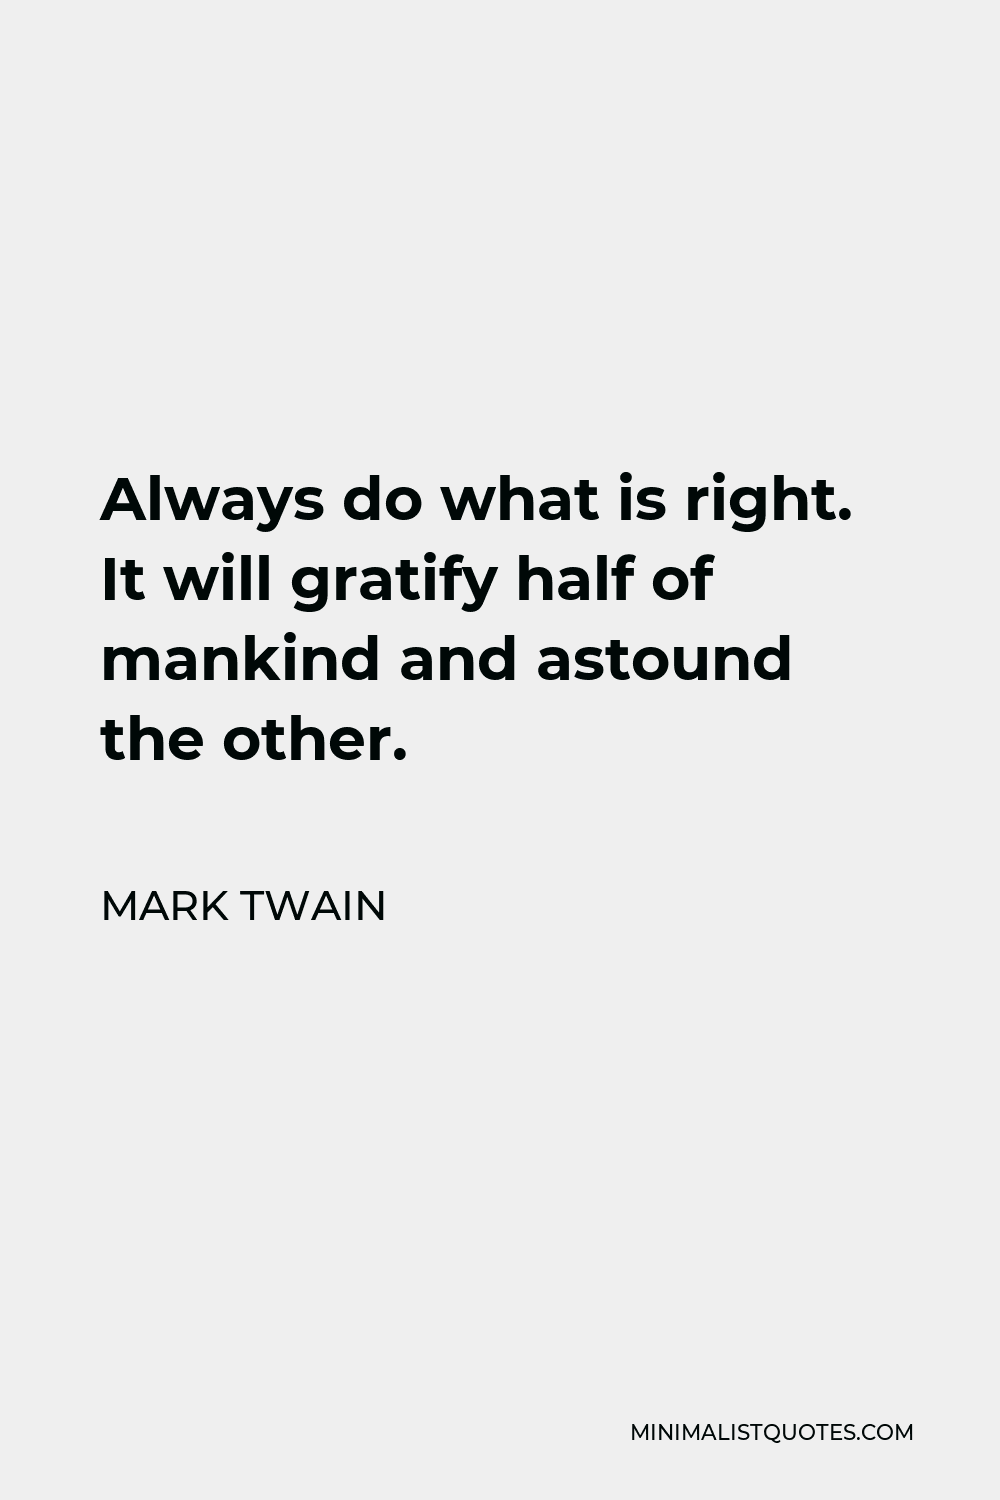 Mark Twain Quote - Always do what is right. It will gratify half of mankind and astound the other.